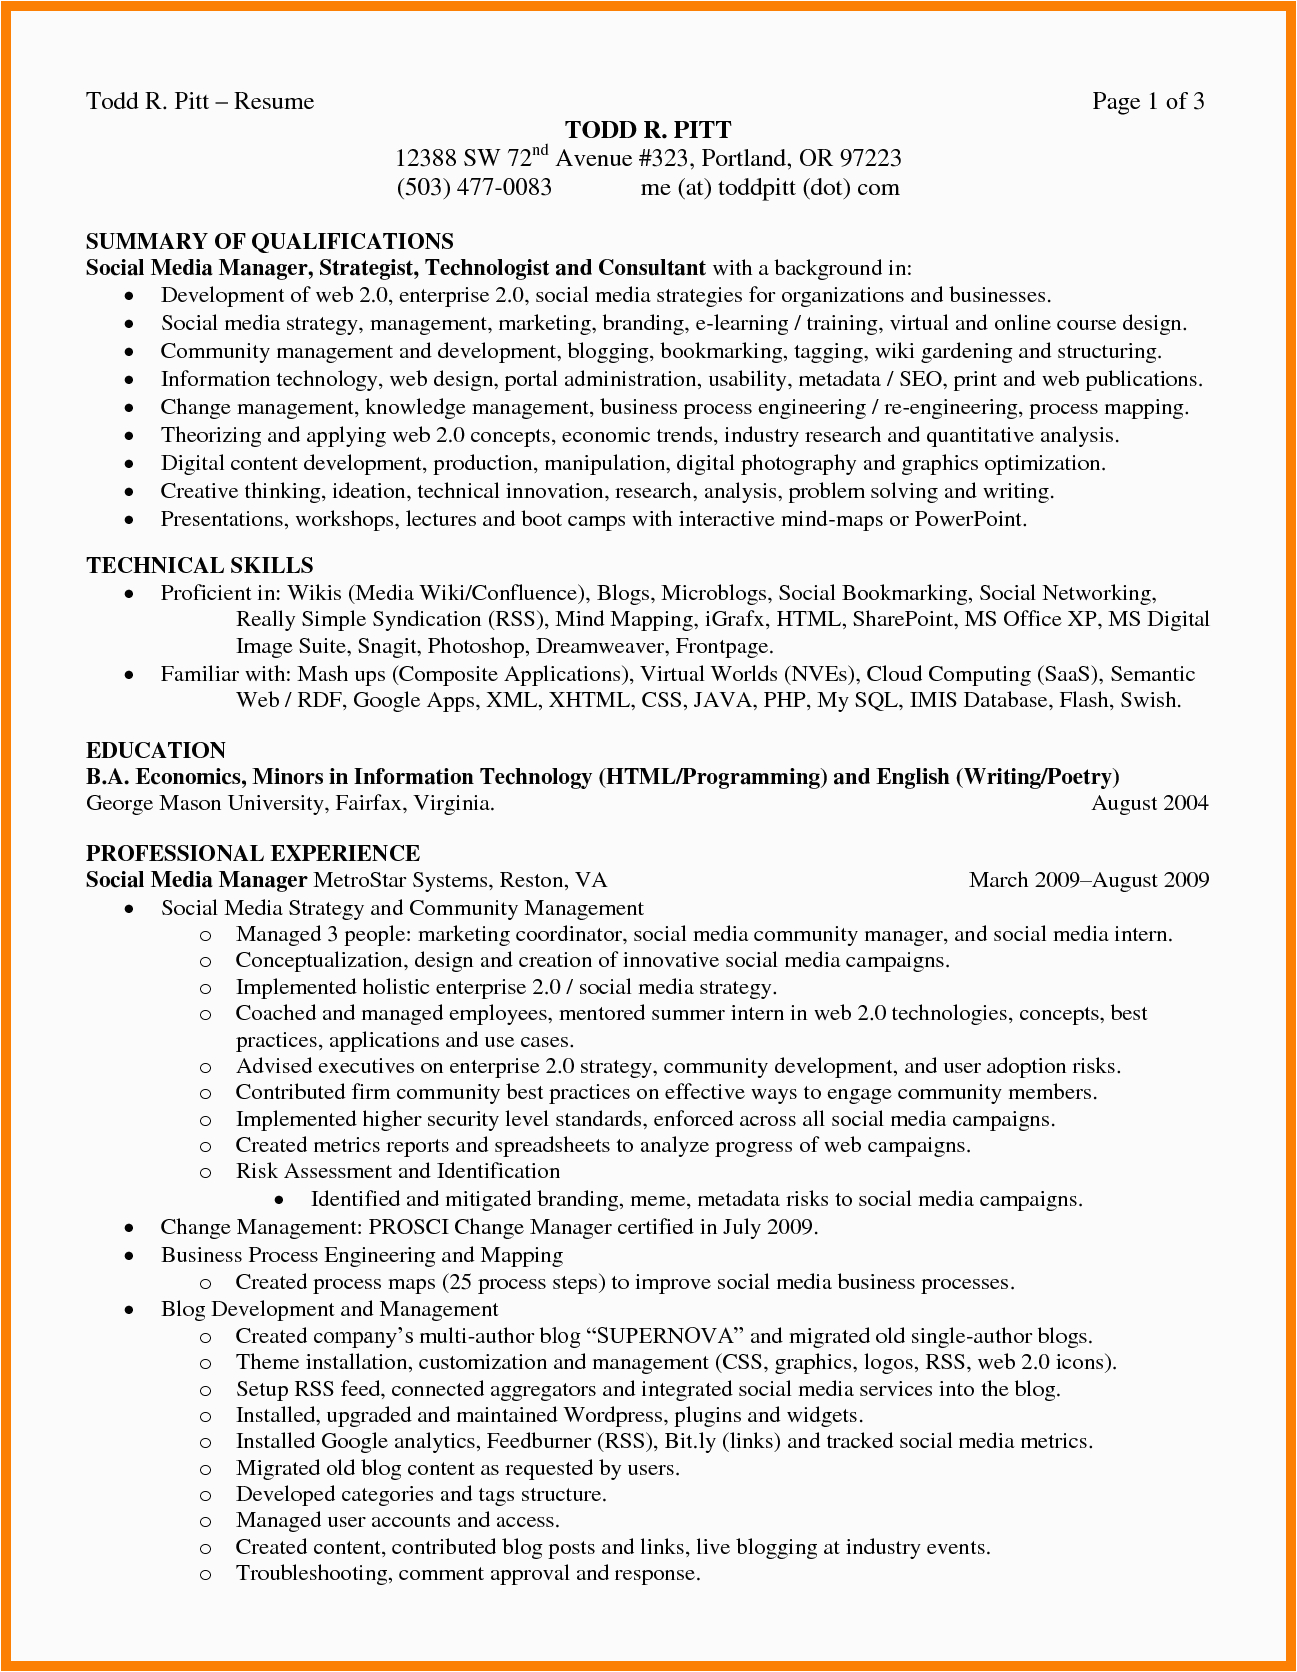 Sample Resume Summary Of Qualifications Examples 6 Summary Of Qualification Resume Examples Ledger Review